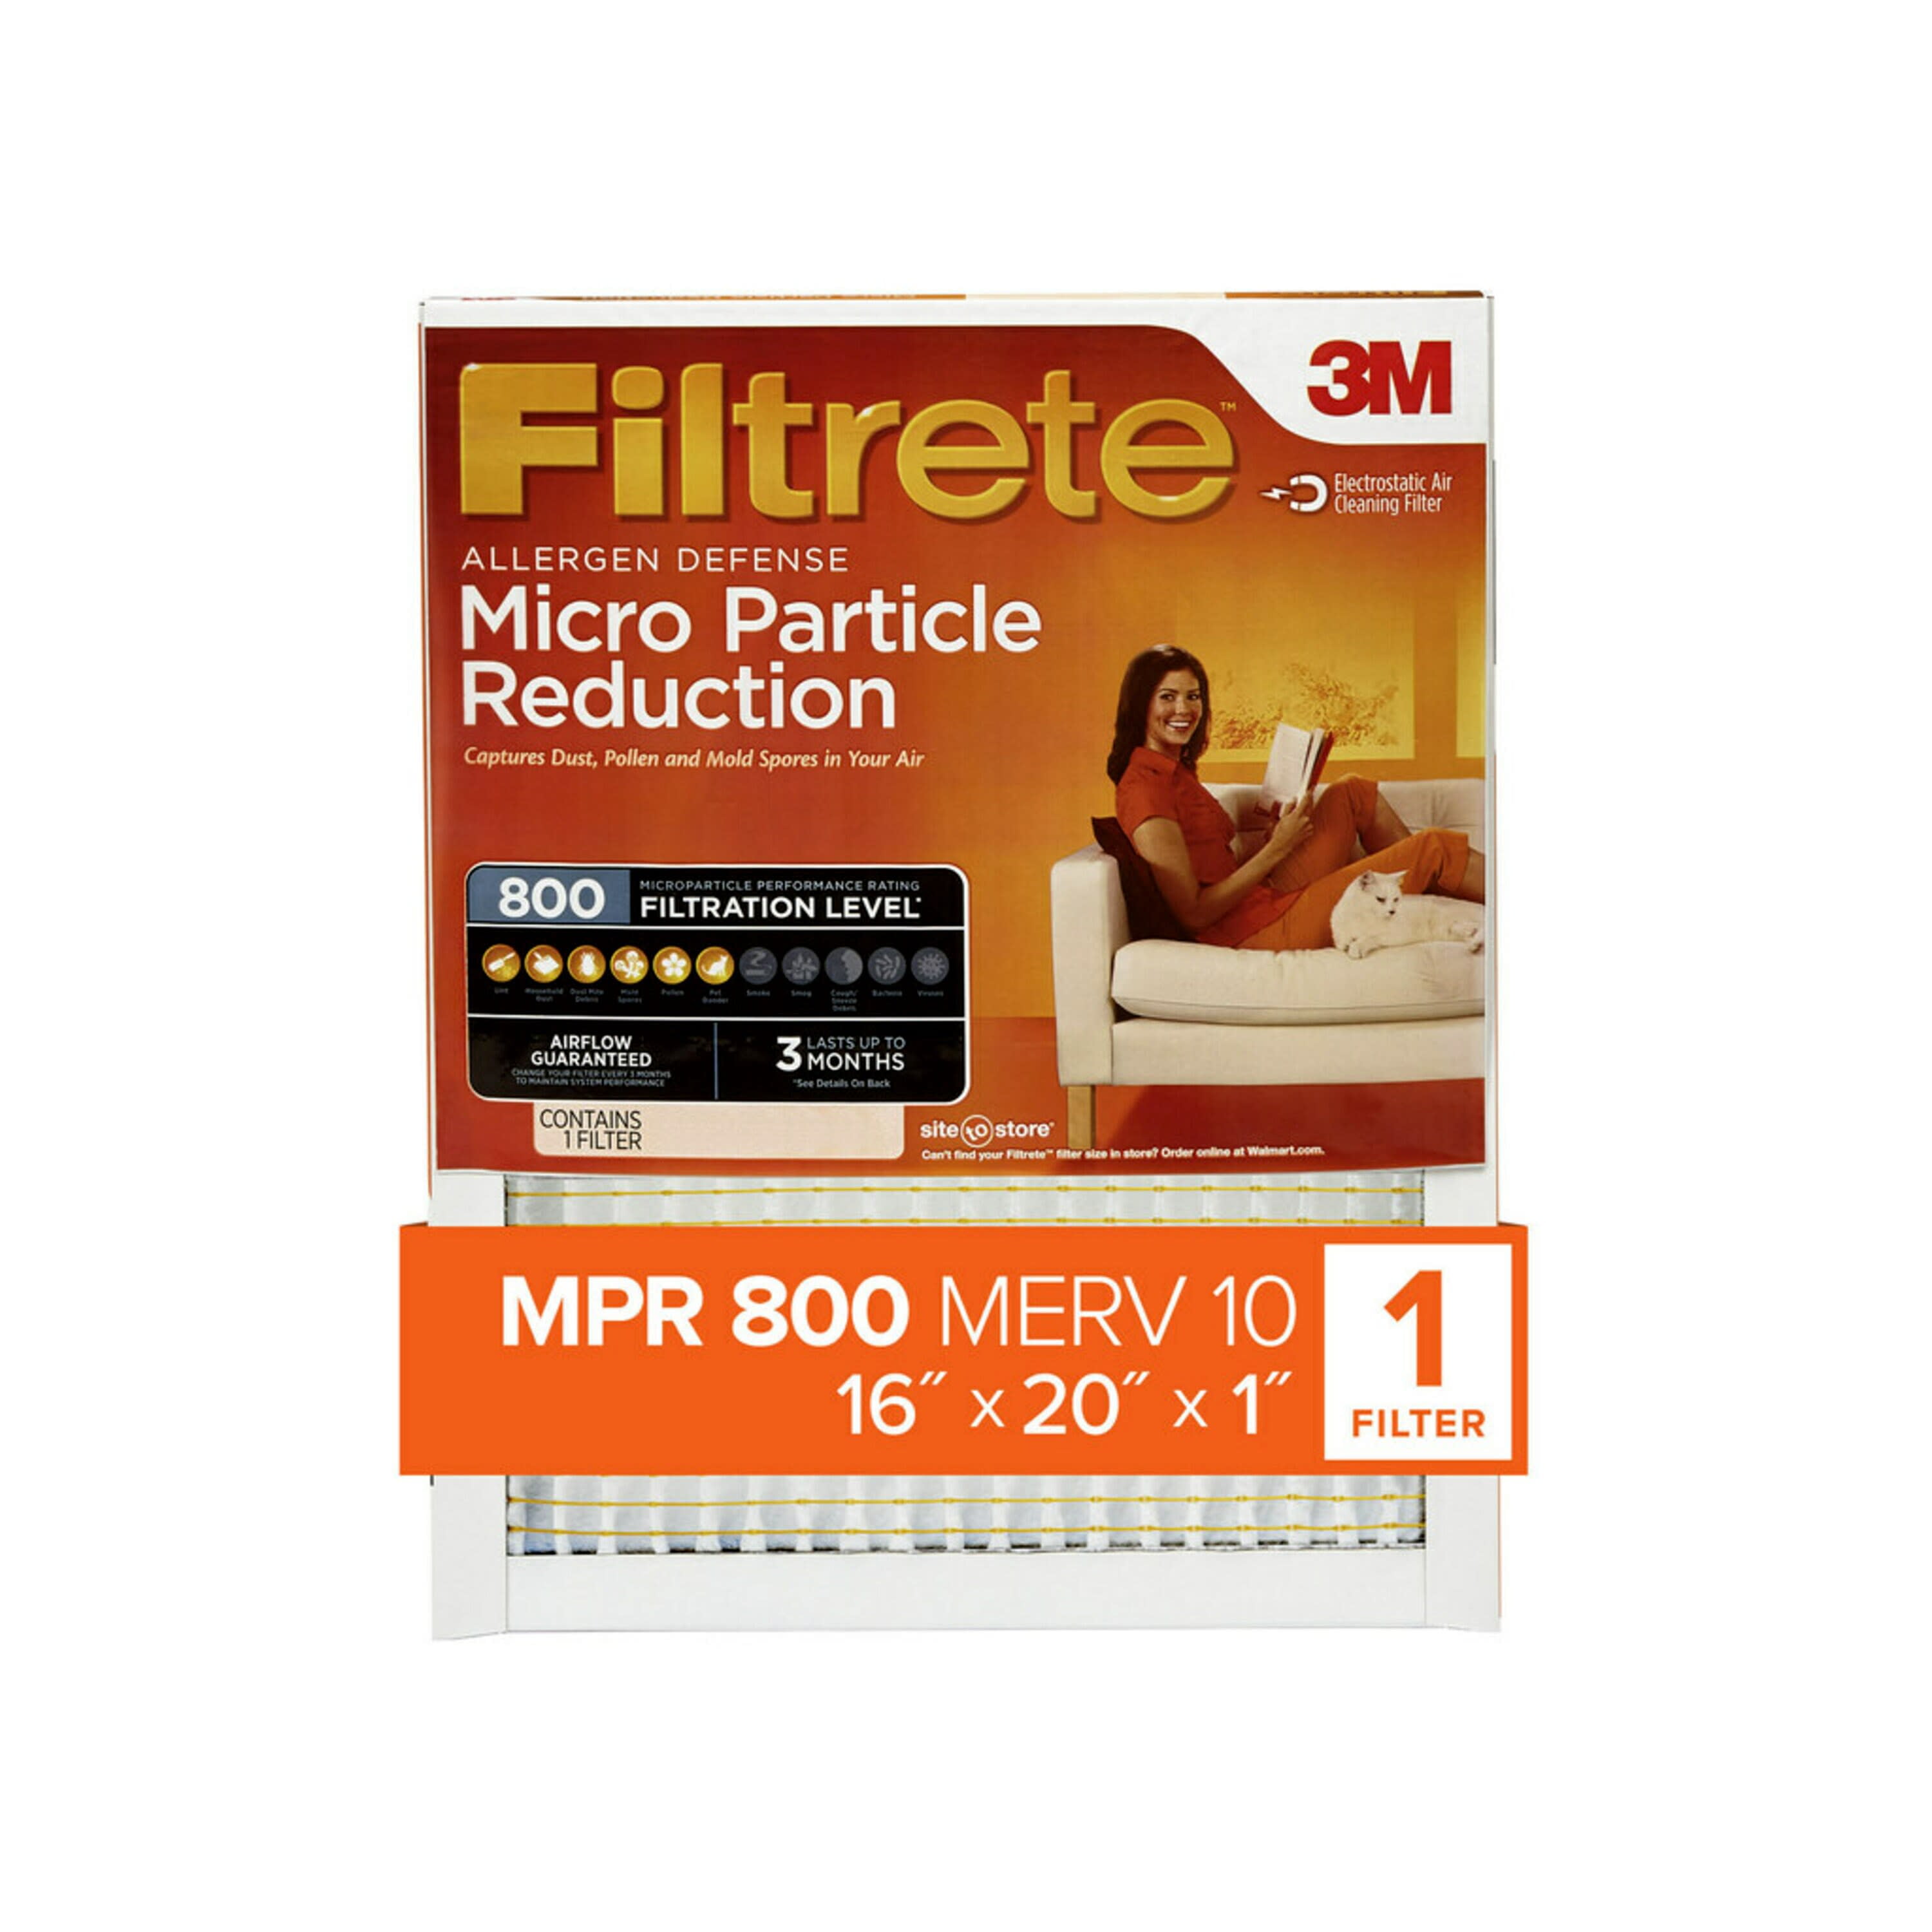 Filtrete by 3M, 16x20x1, MERV 10, Micro Particle Reduction HVAC Furnace Air Filter, Captures Pet Dander and Pollen, 800 MPR, 1 Filter